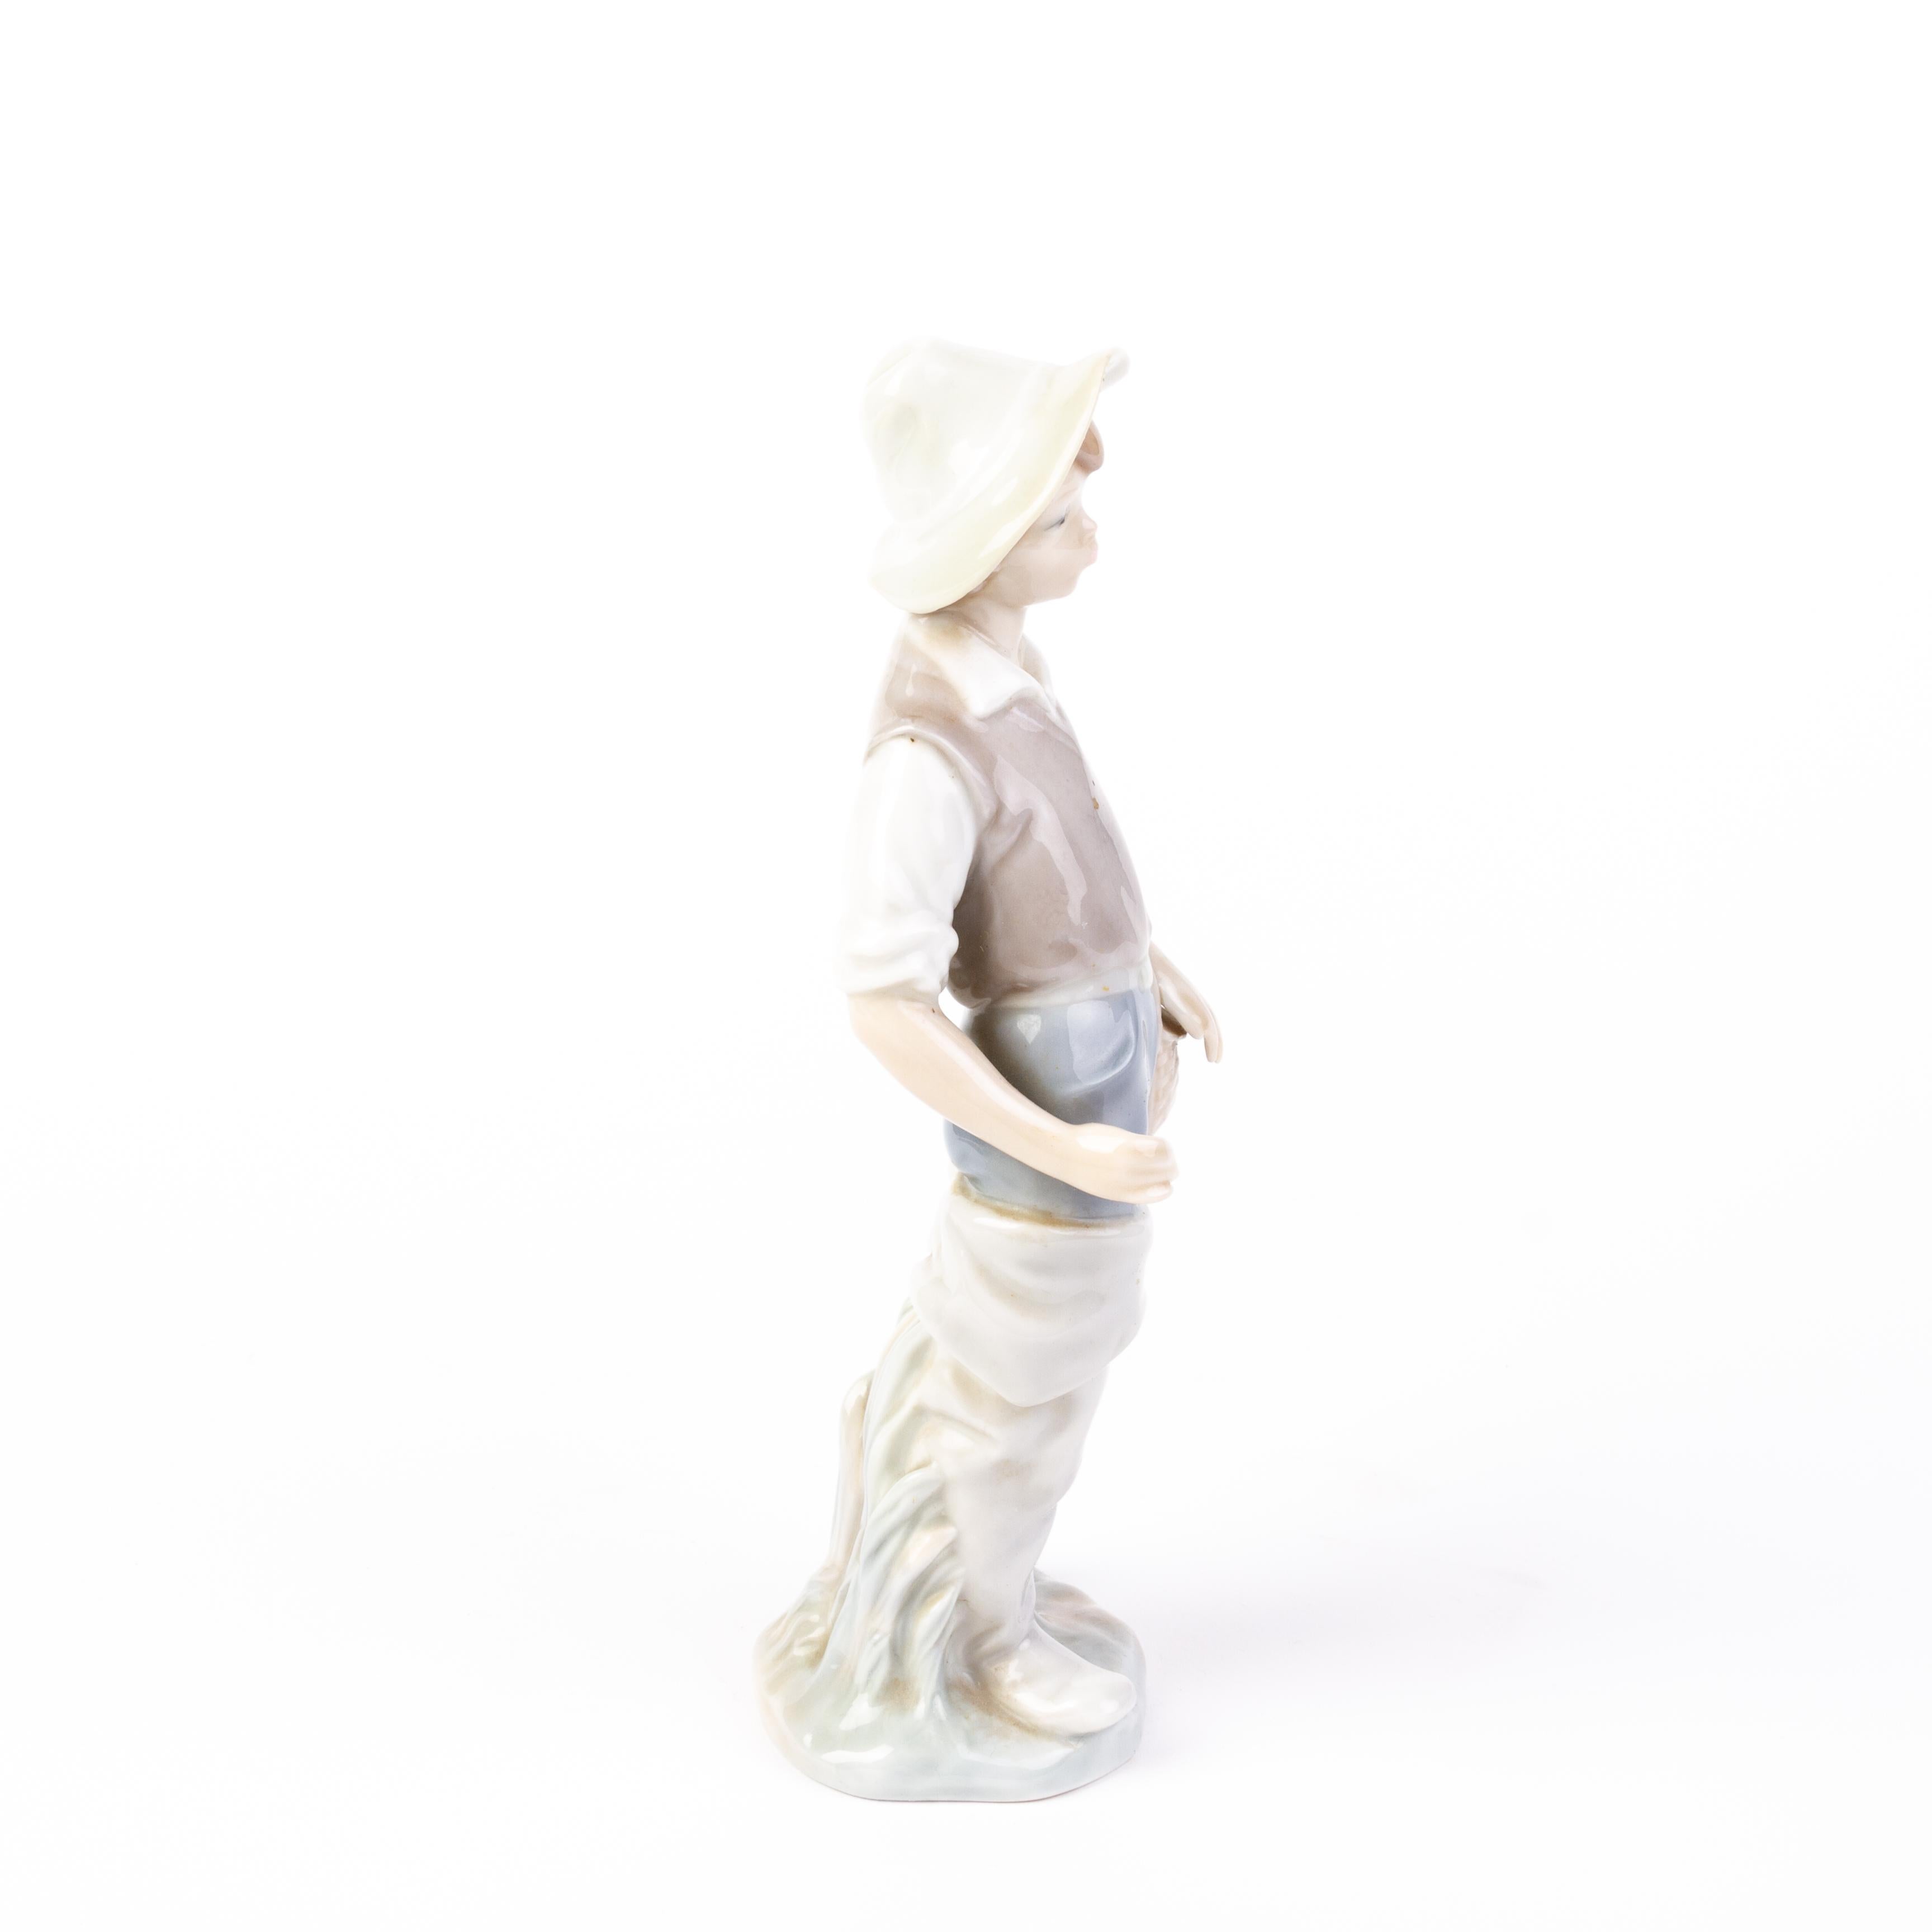 In good condition
From a private collection
Free international shipping
Lladro Fine Porcelain Figure 